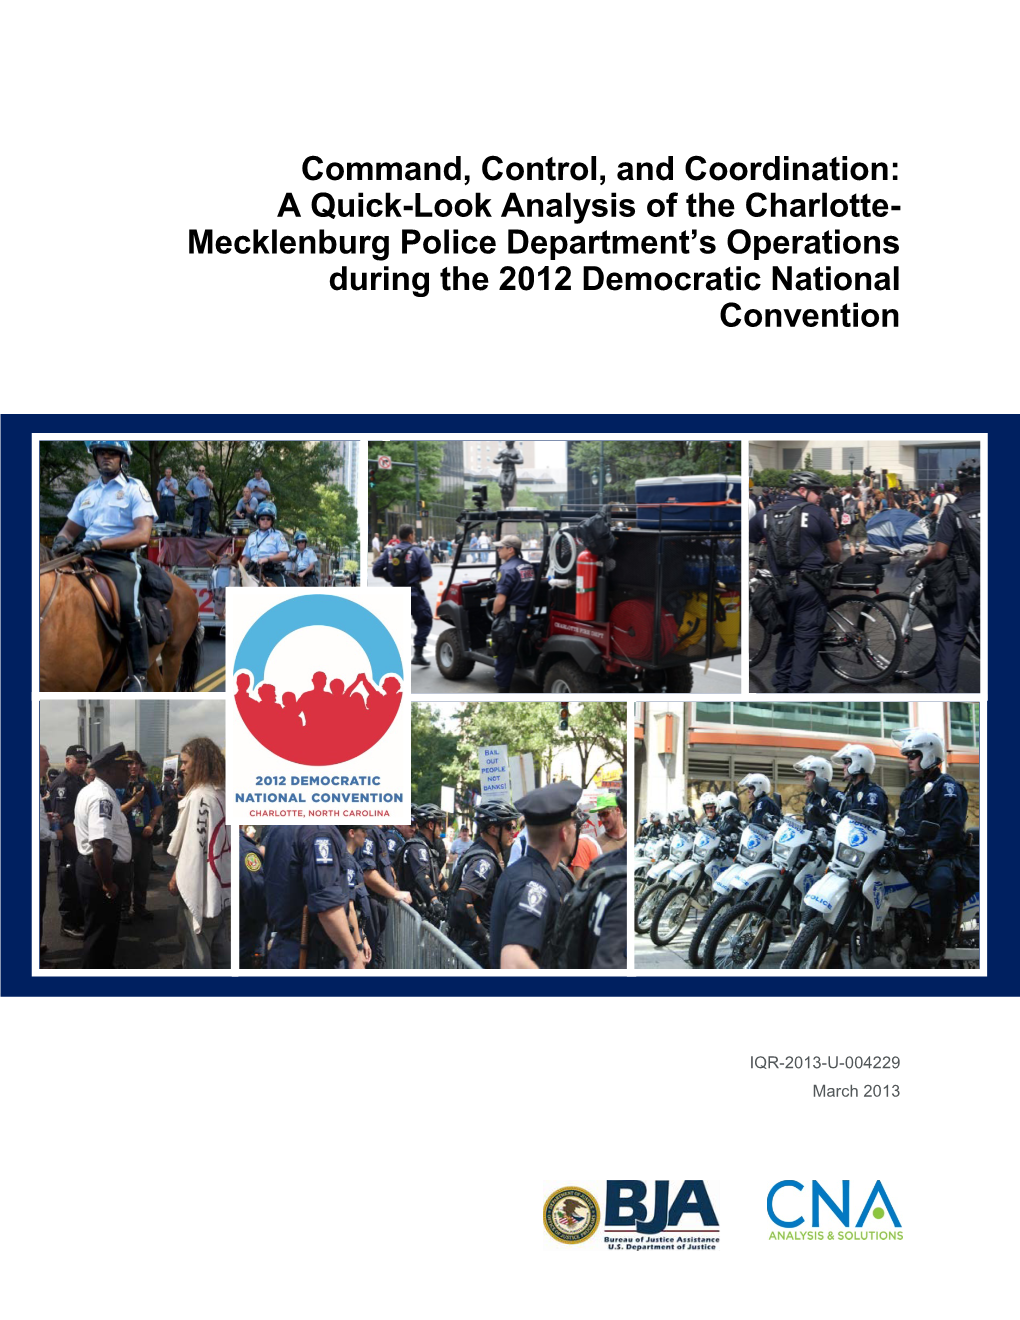 Command, Control, and Coordination: a Quick-Look Analysis of the Charlotte- Mecklenburg Police Department’S Operations During the 2012 Democratic National Convention